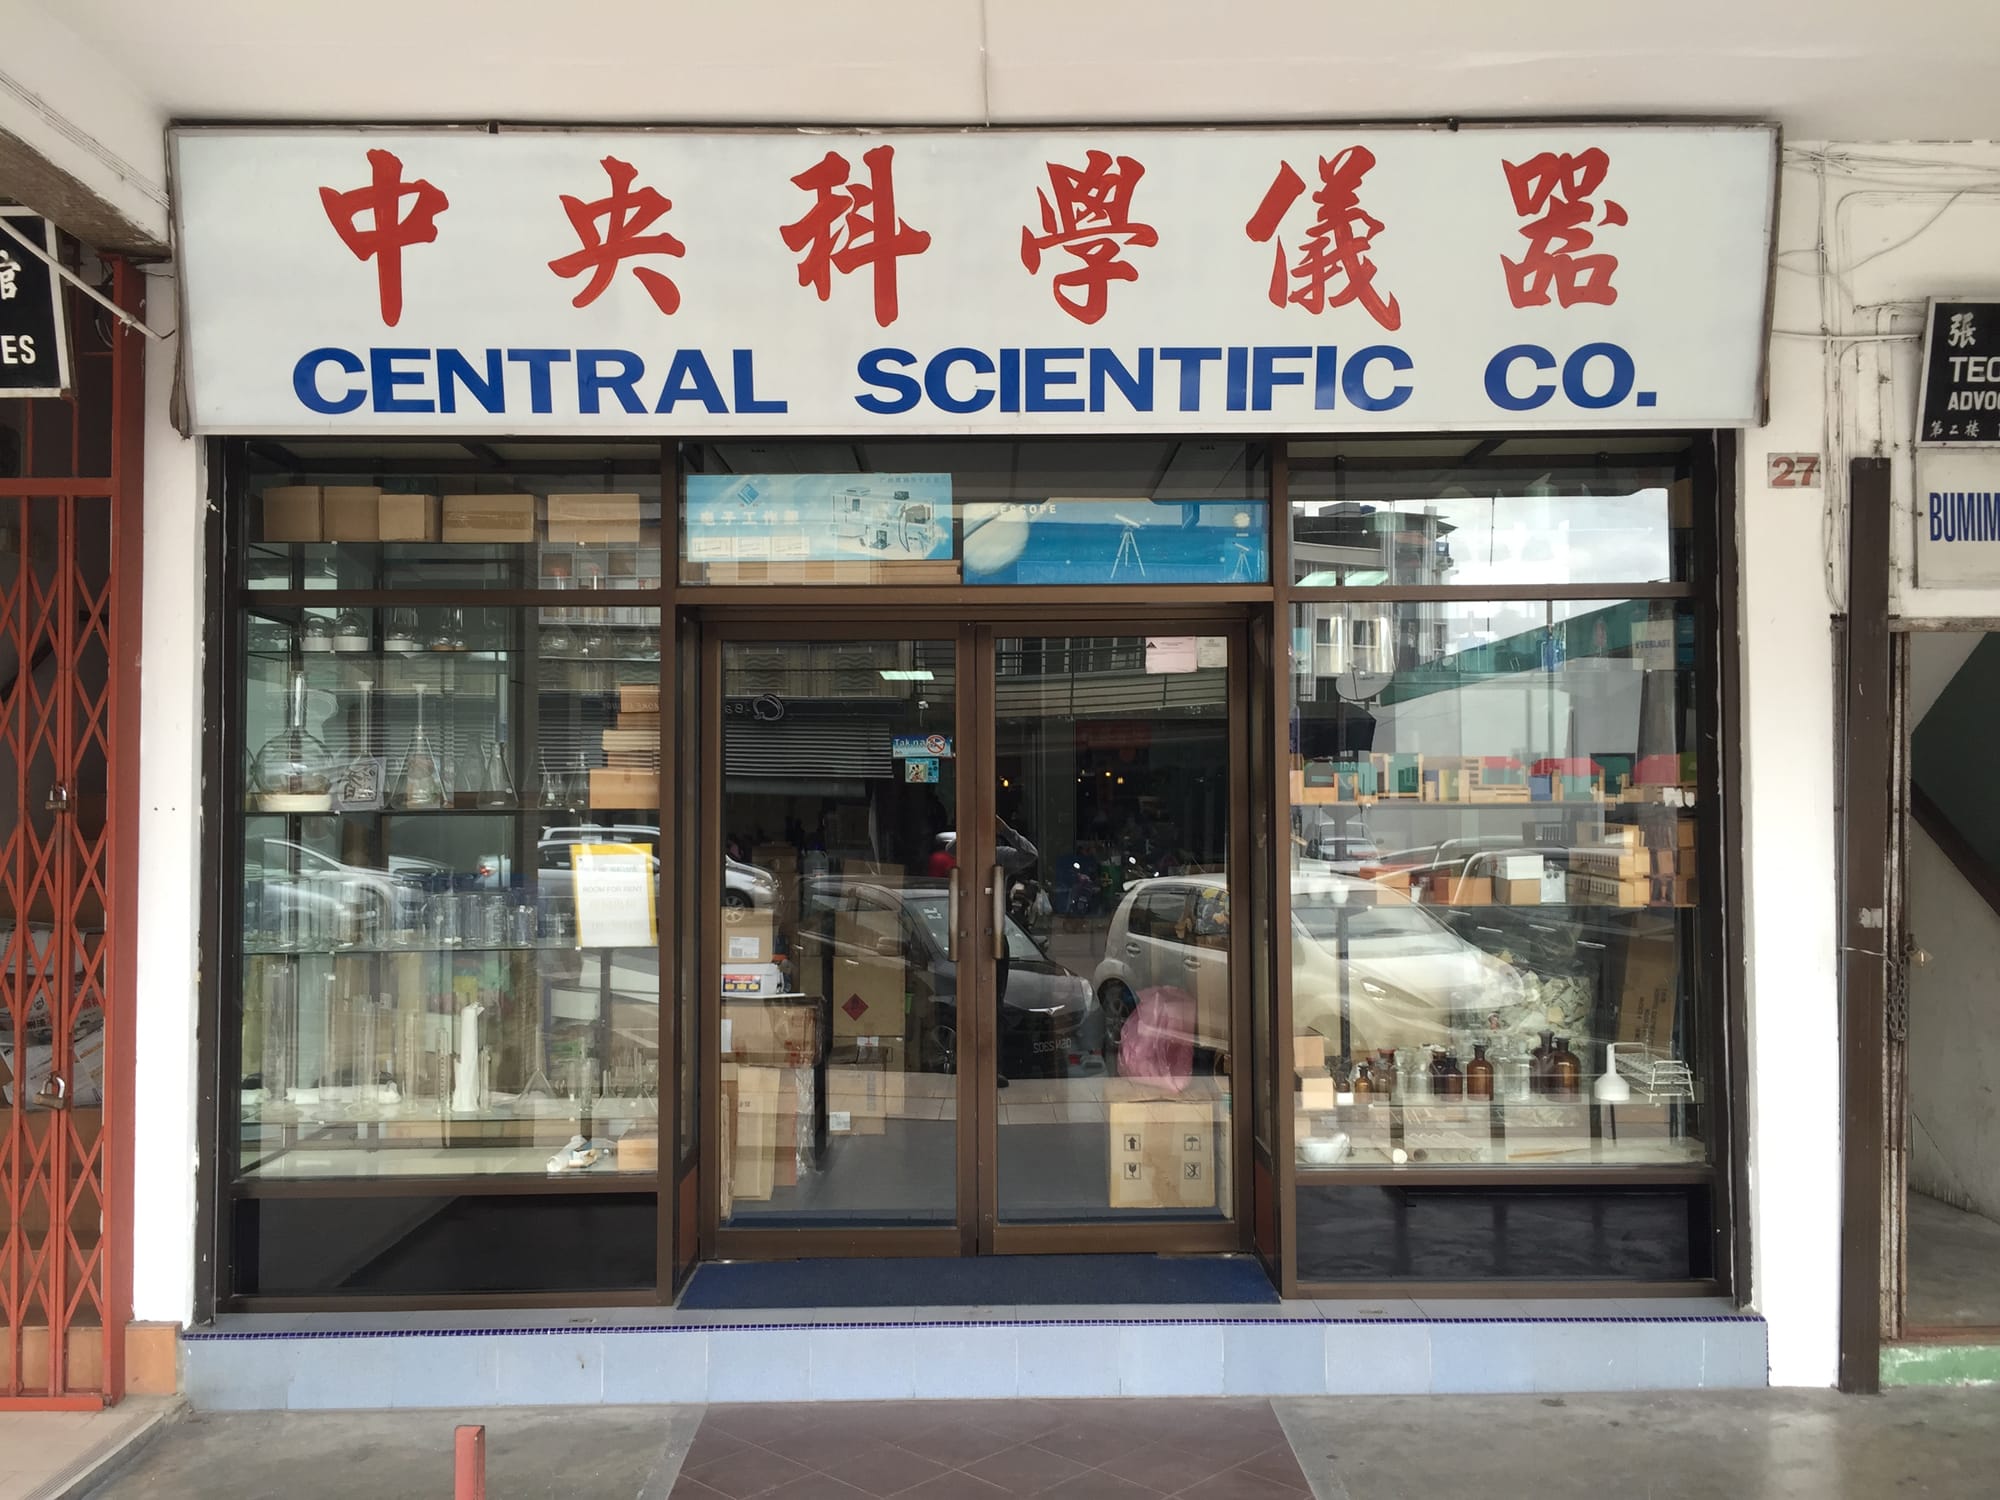 Photo by Author — The Central Scientific Store — I love this shop